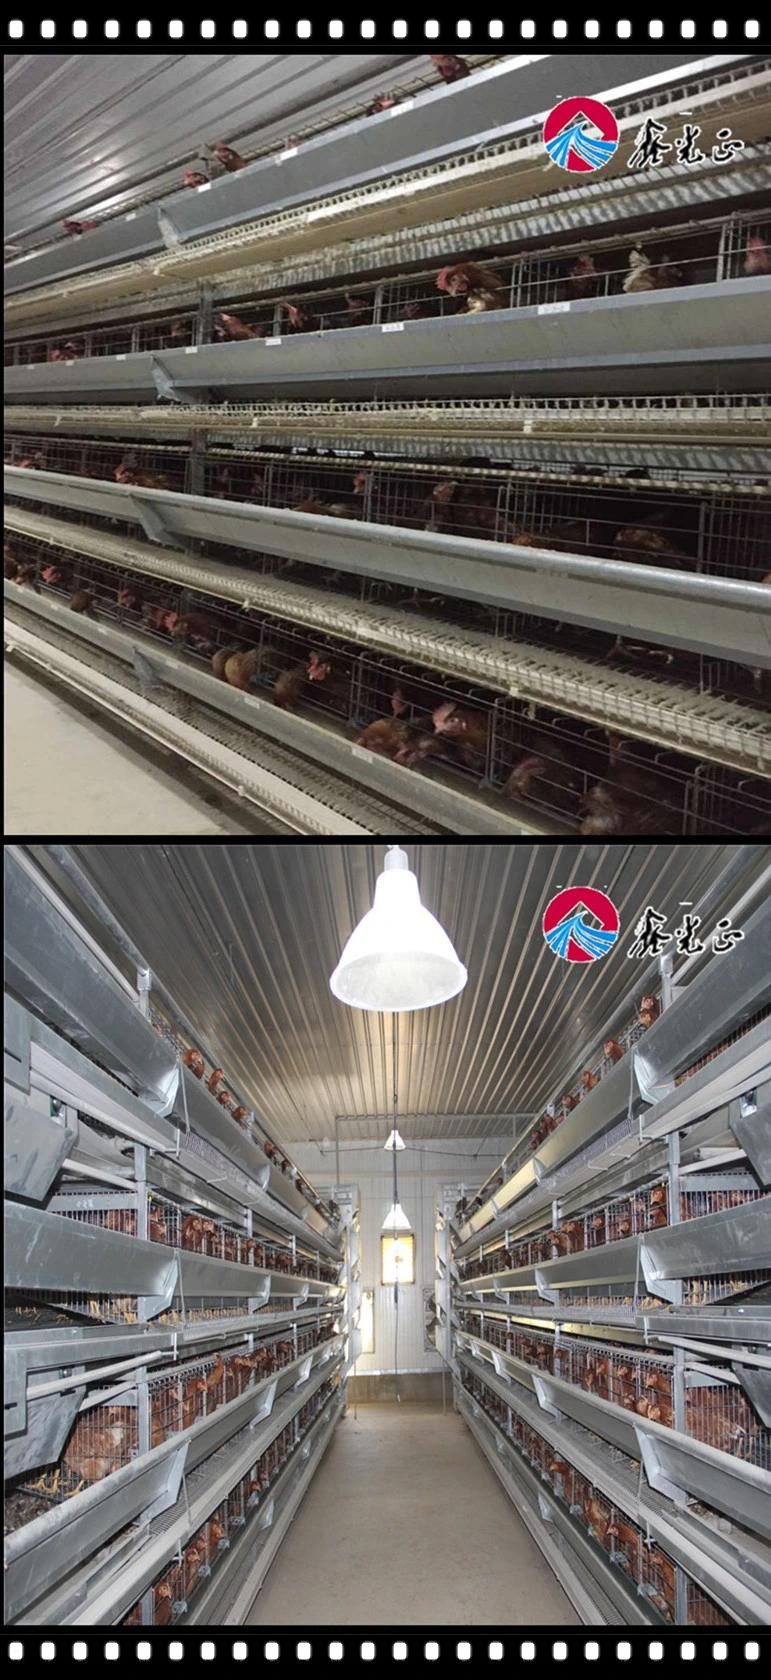 Good Price Automatic Poultry Farm Equipment Layer Chicken Battery Cage for Sale